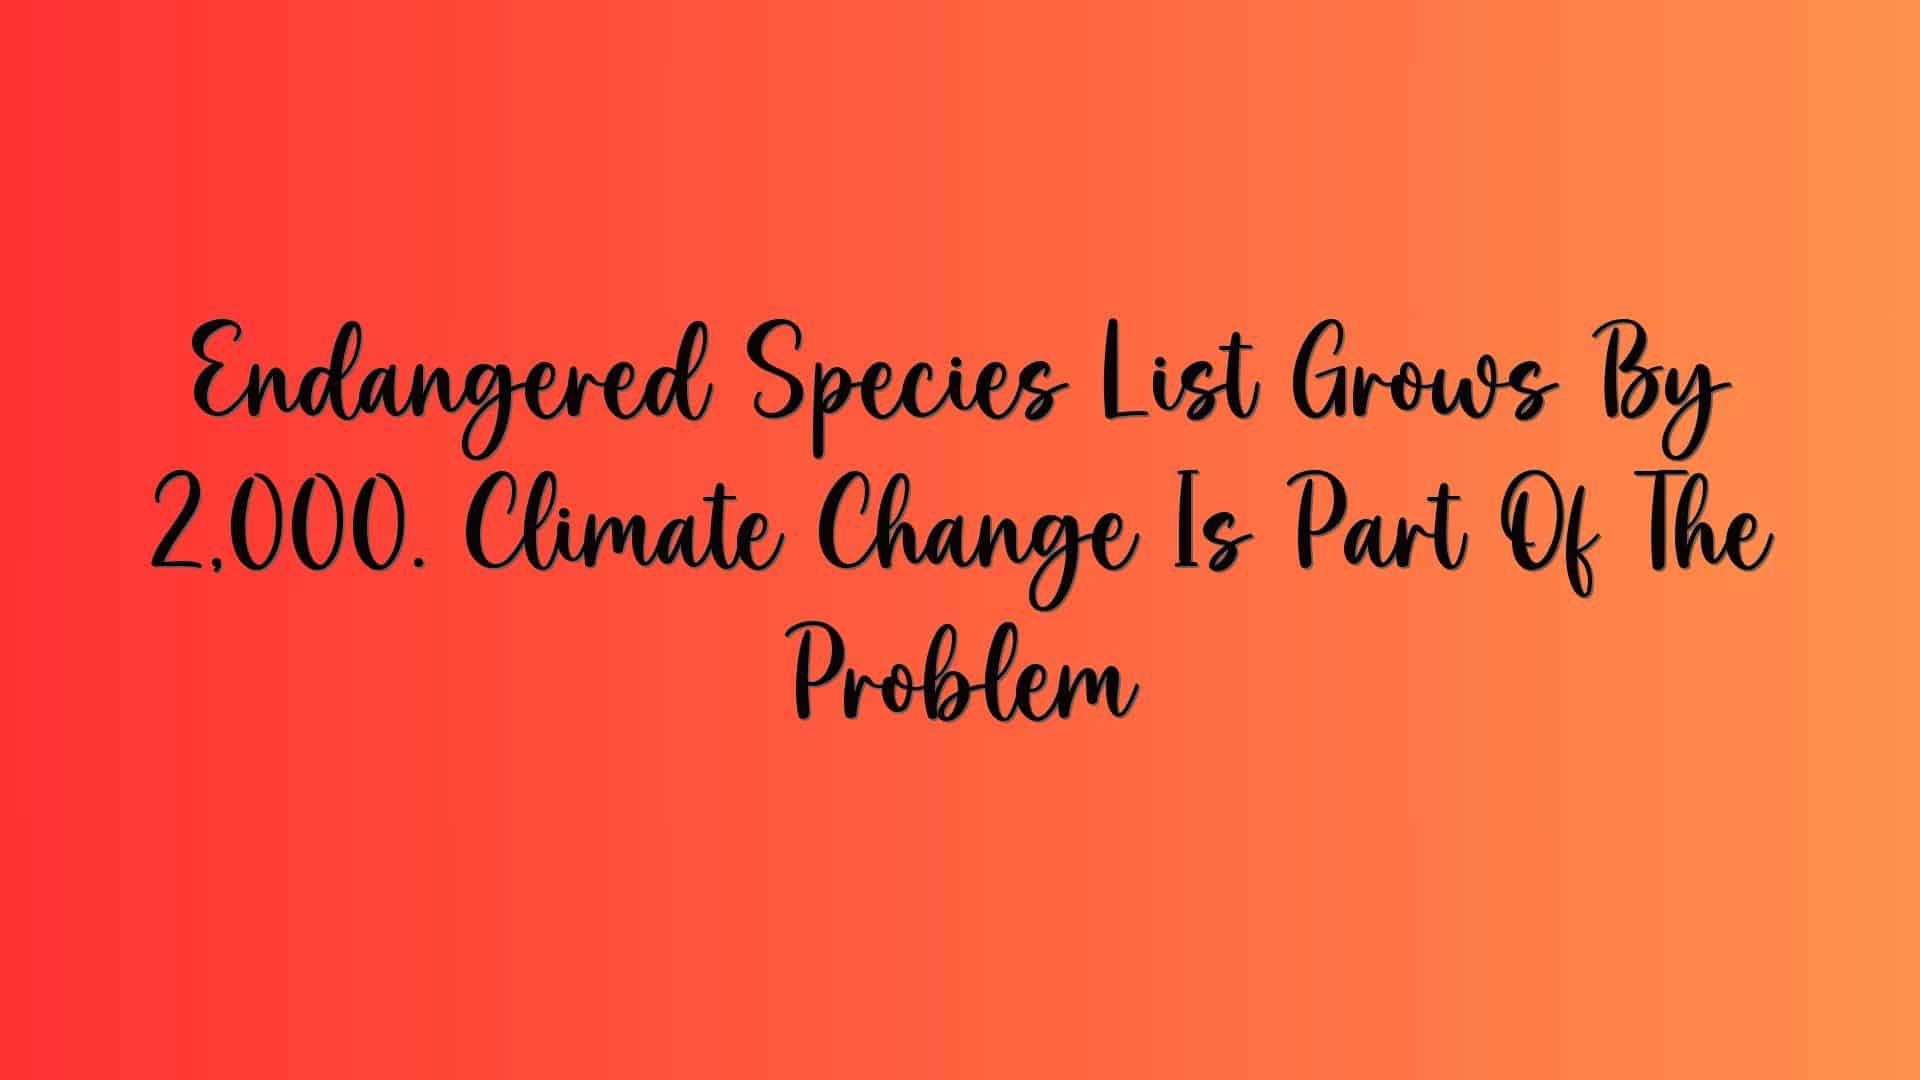 Endangered Species List Grows By 2,000. Climate Change Is Part Of The Problem